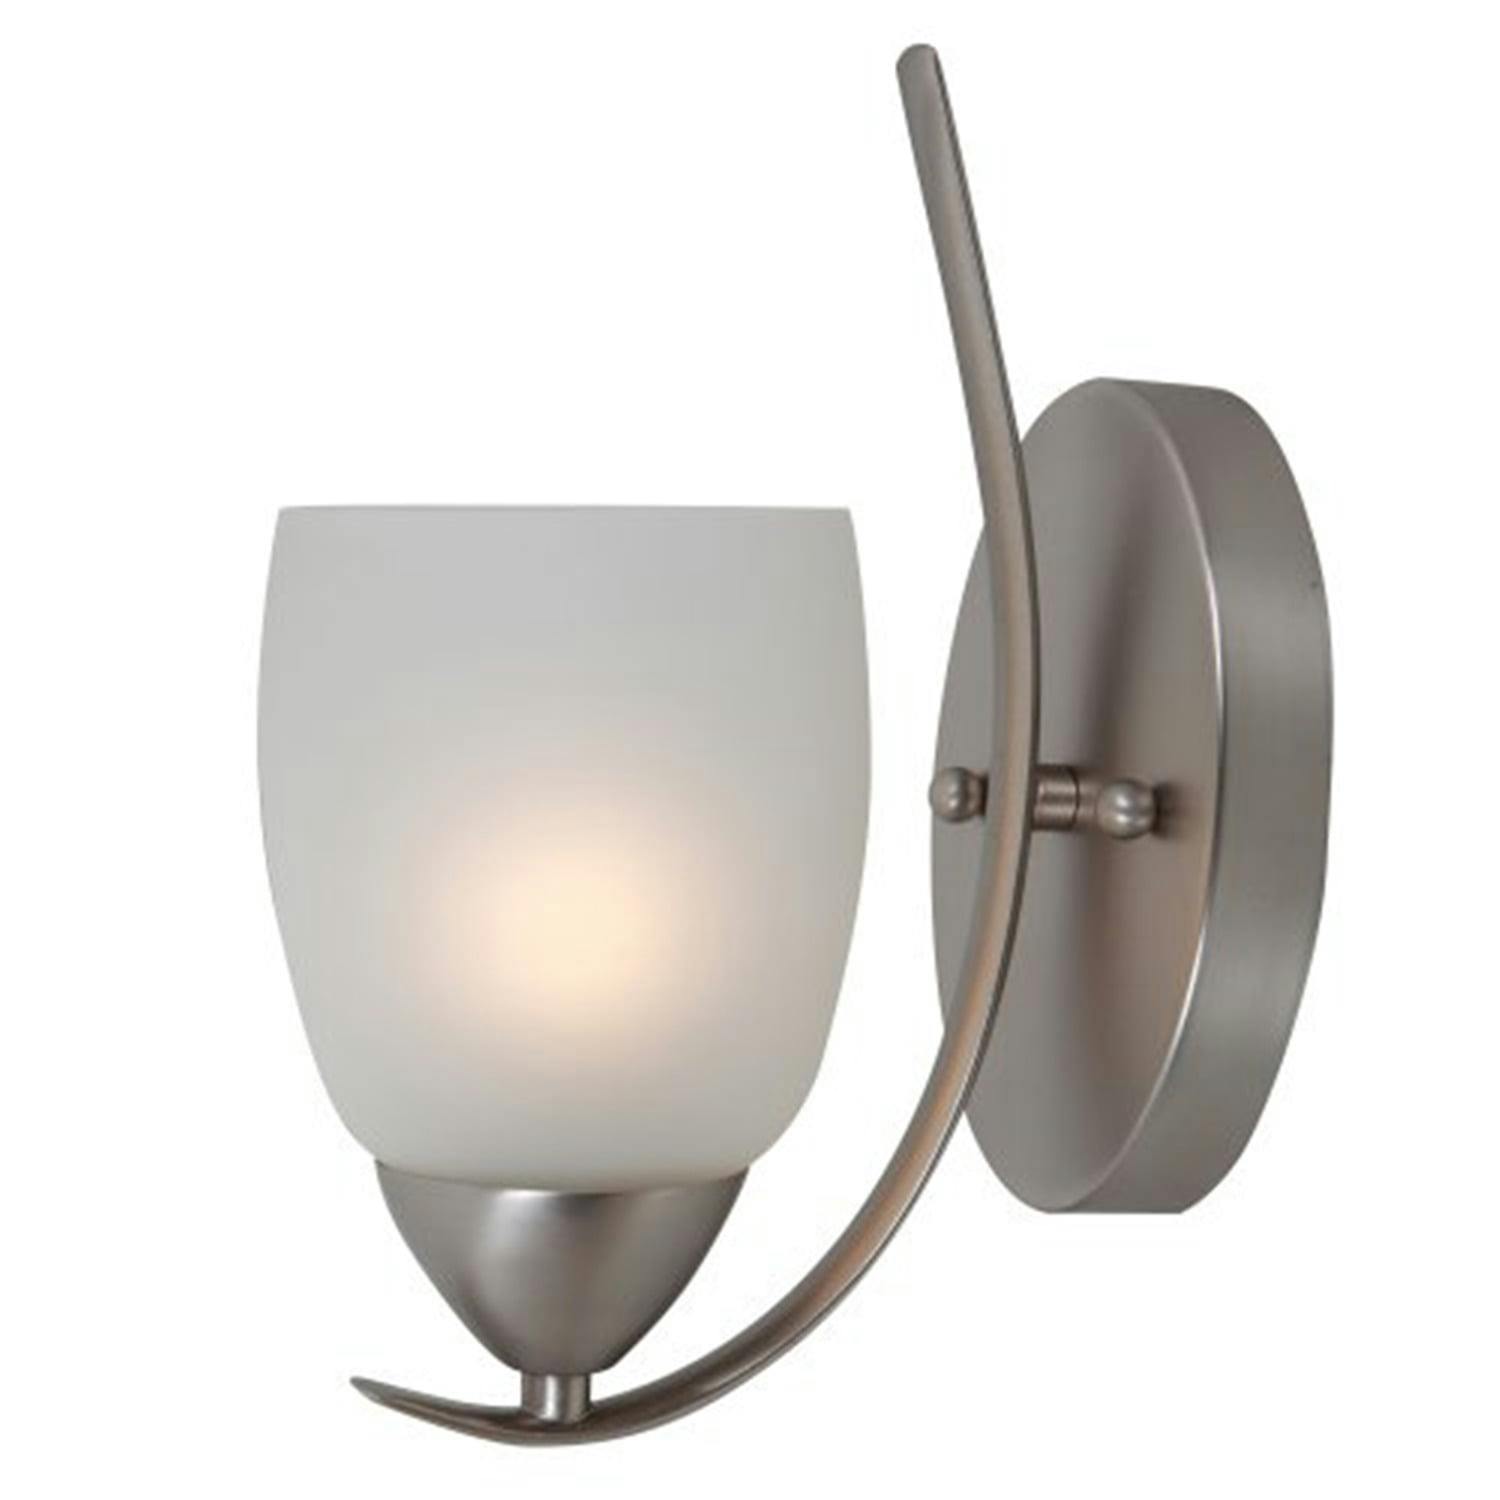 Mirror Lake Brushed Nickel Vanity Wall Sconce with White Glass Shade